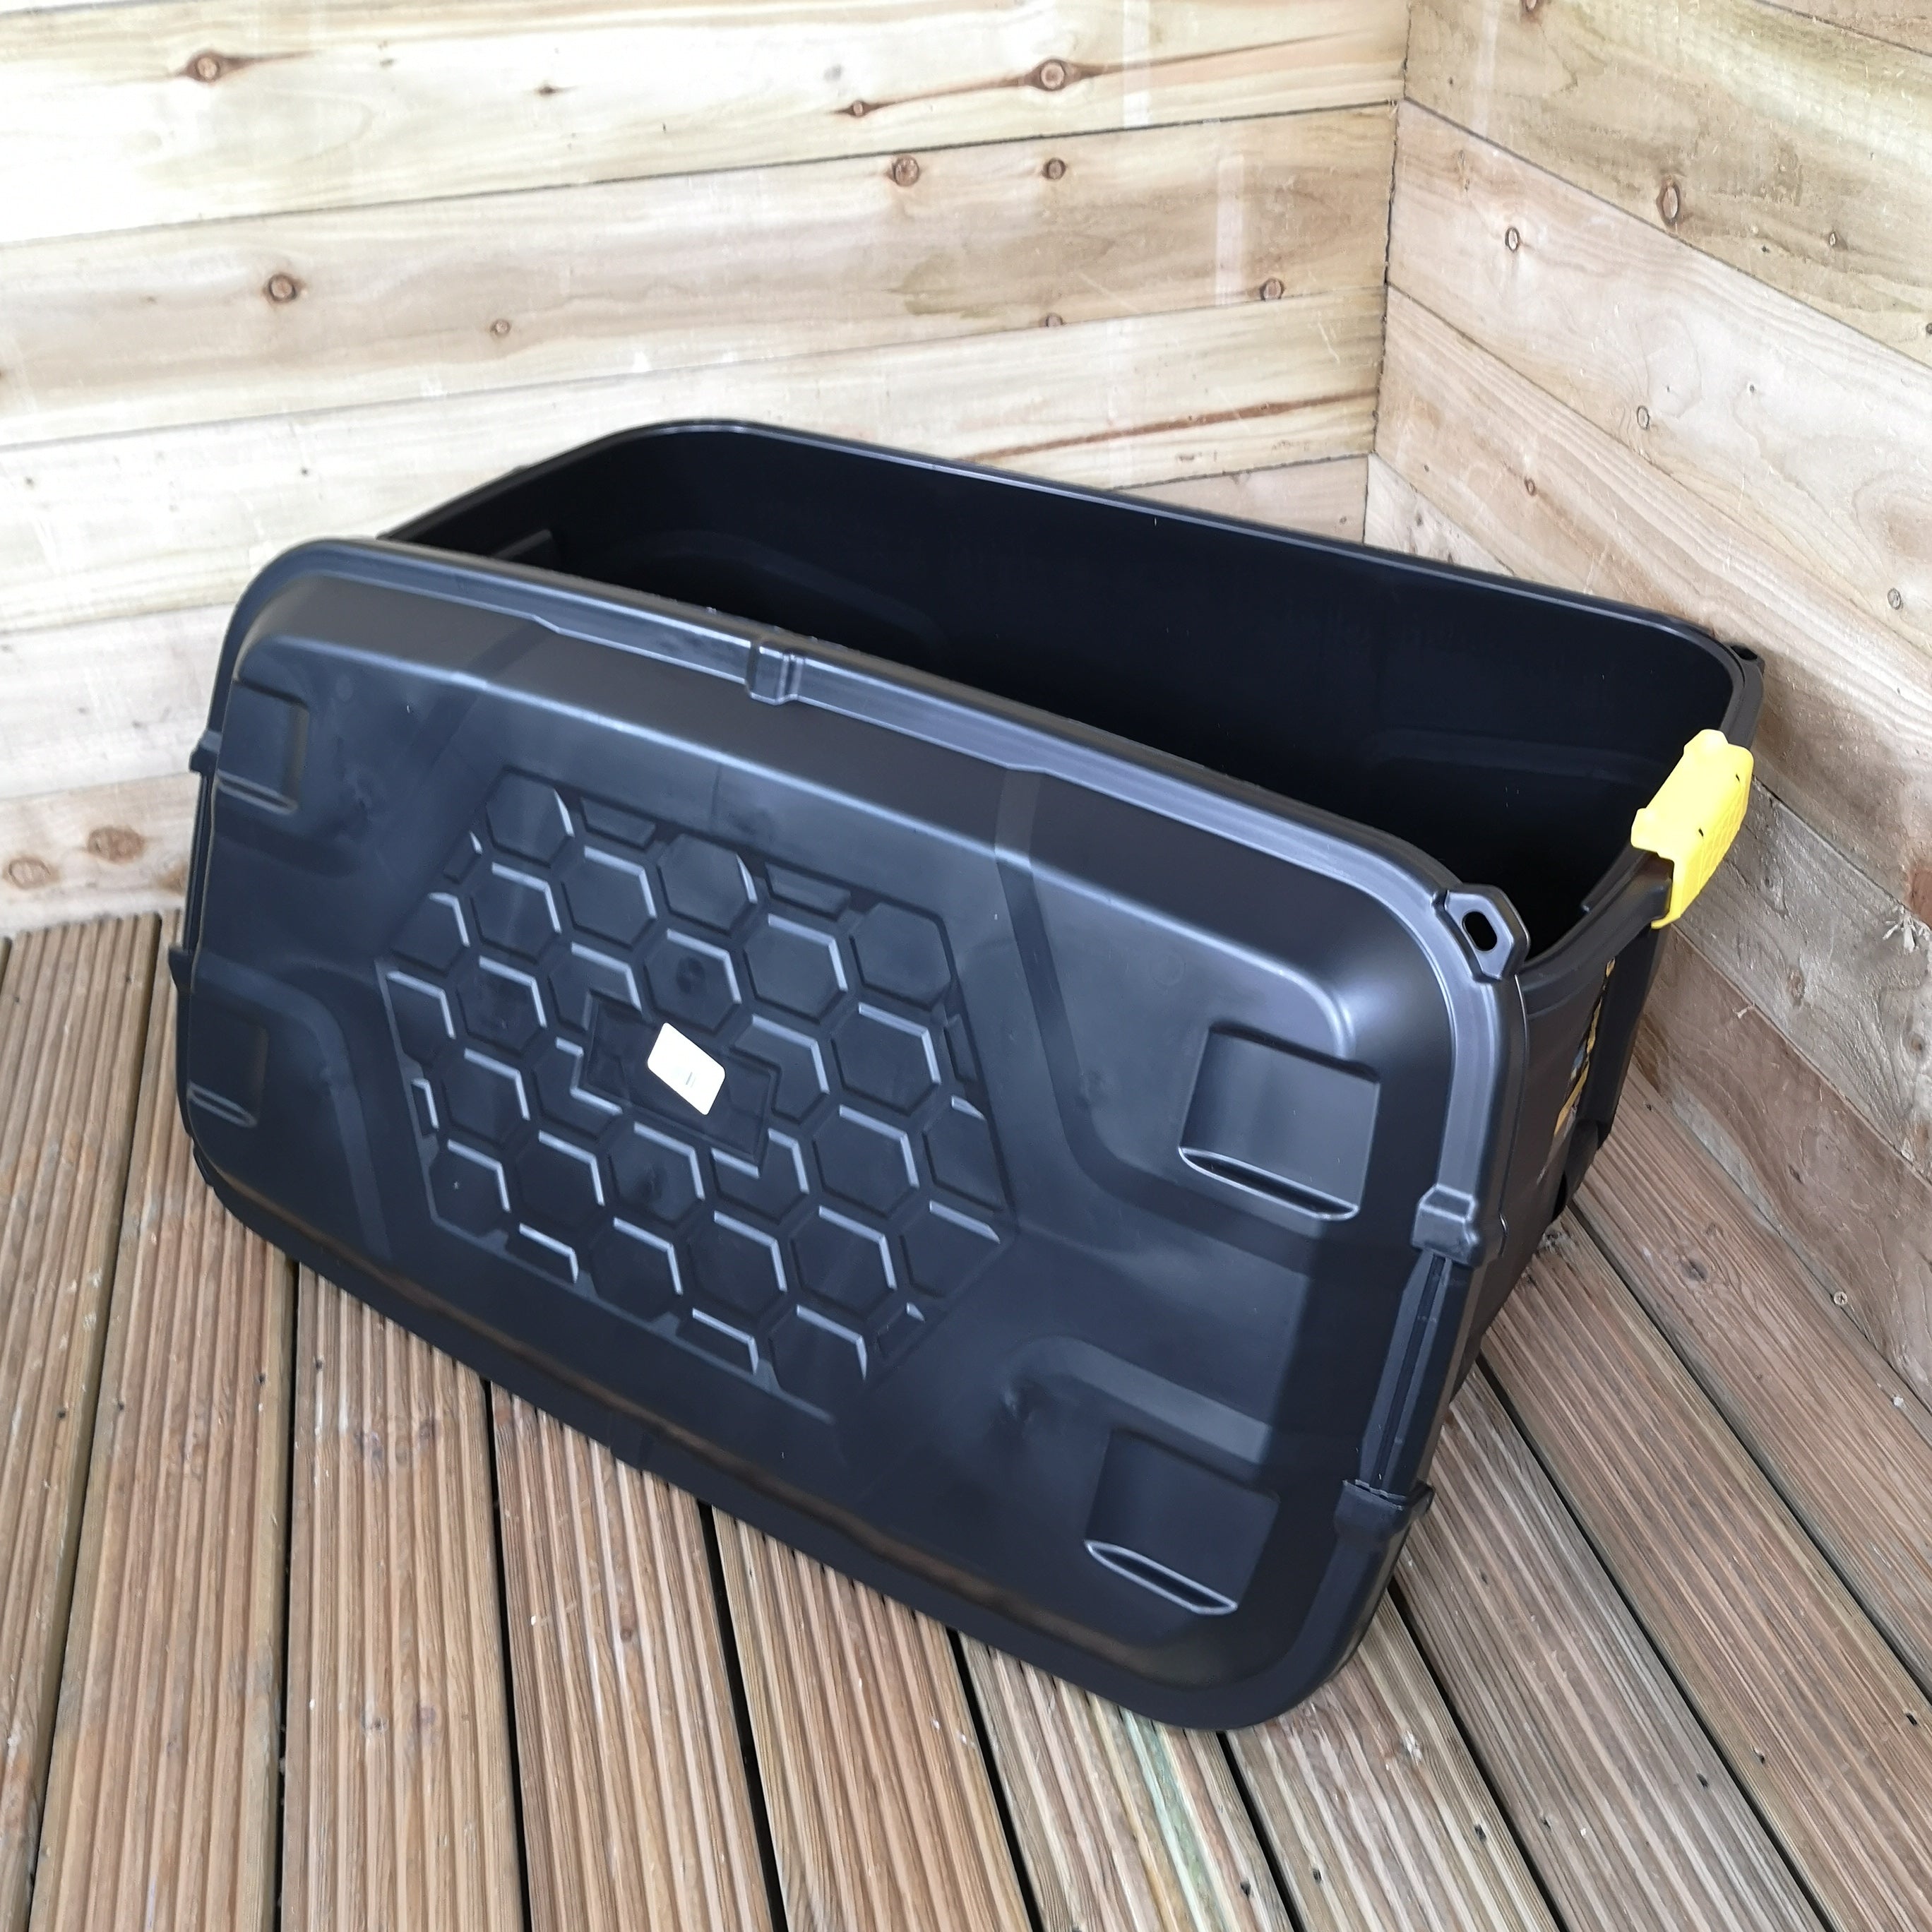 1 x 145L AND 2 x 60L Heavy Duty Trunks 1 on Wheels Sturdy, Lockable, Stackable and Nestable Design Storage Chest with Clips in Black